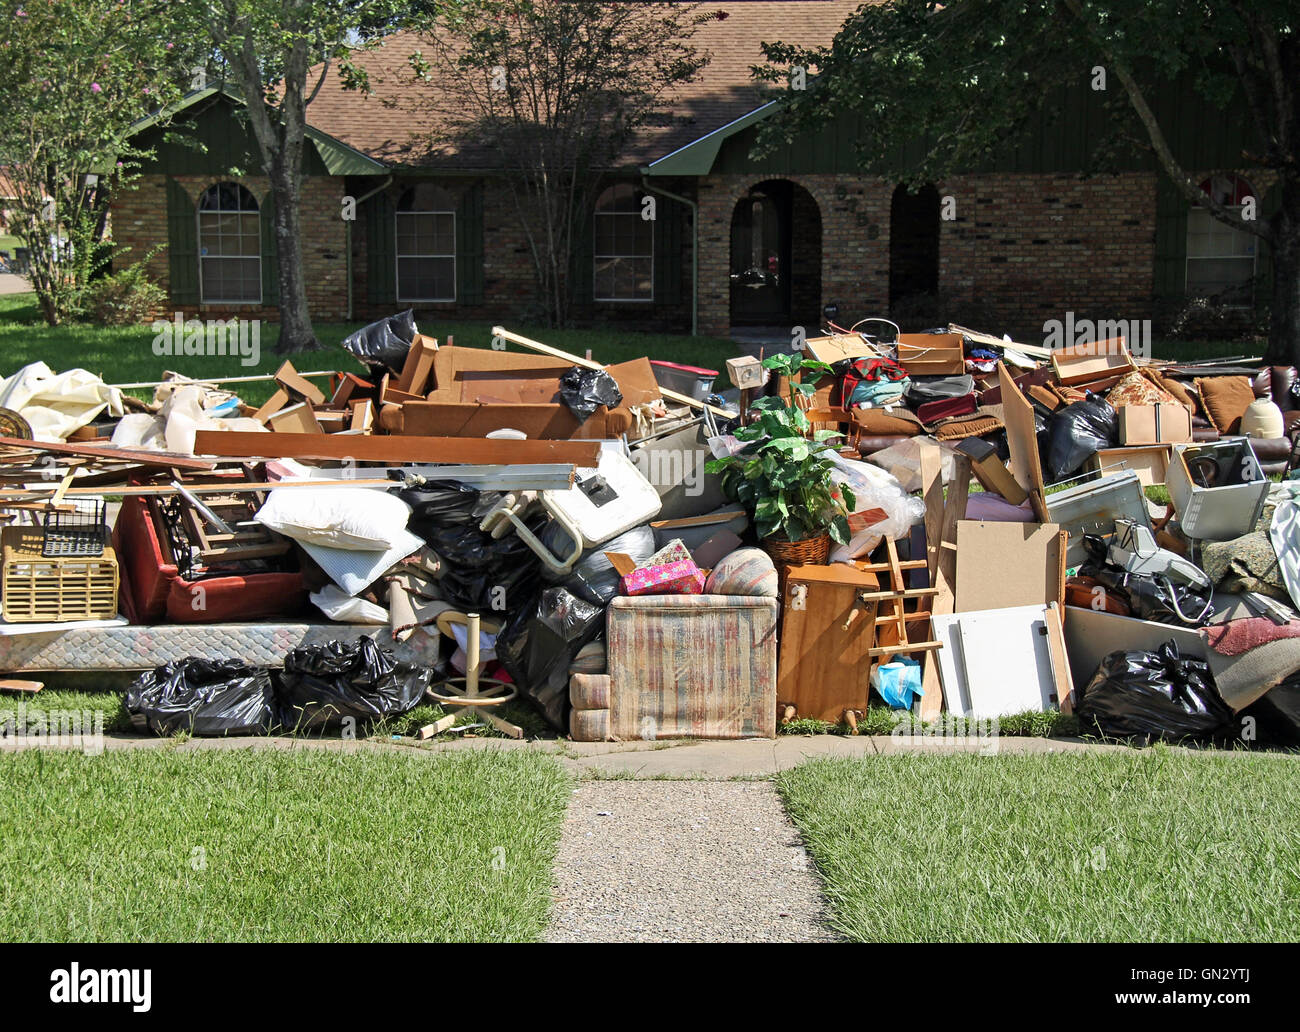 BATON ROUGE - AUGUST 20: Cleaning up after the flood of 2016 in Baton Rouge, LA. Stock Photo